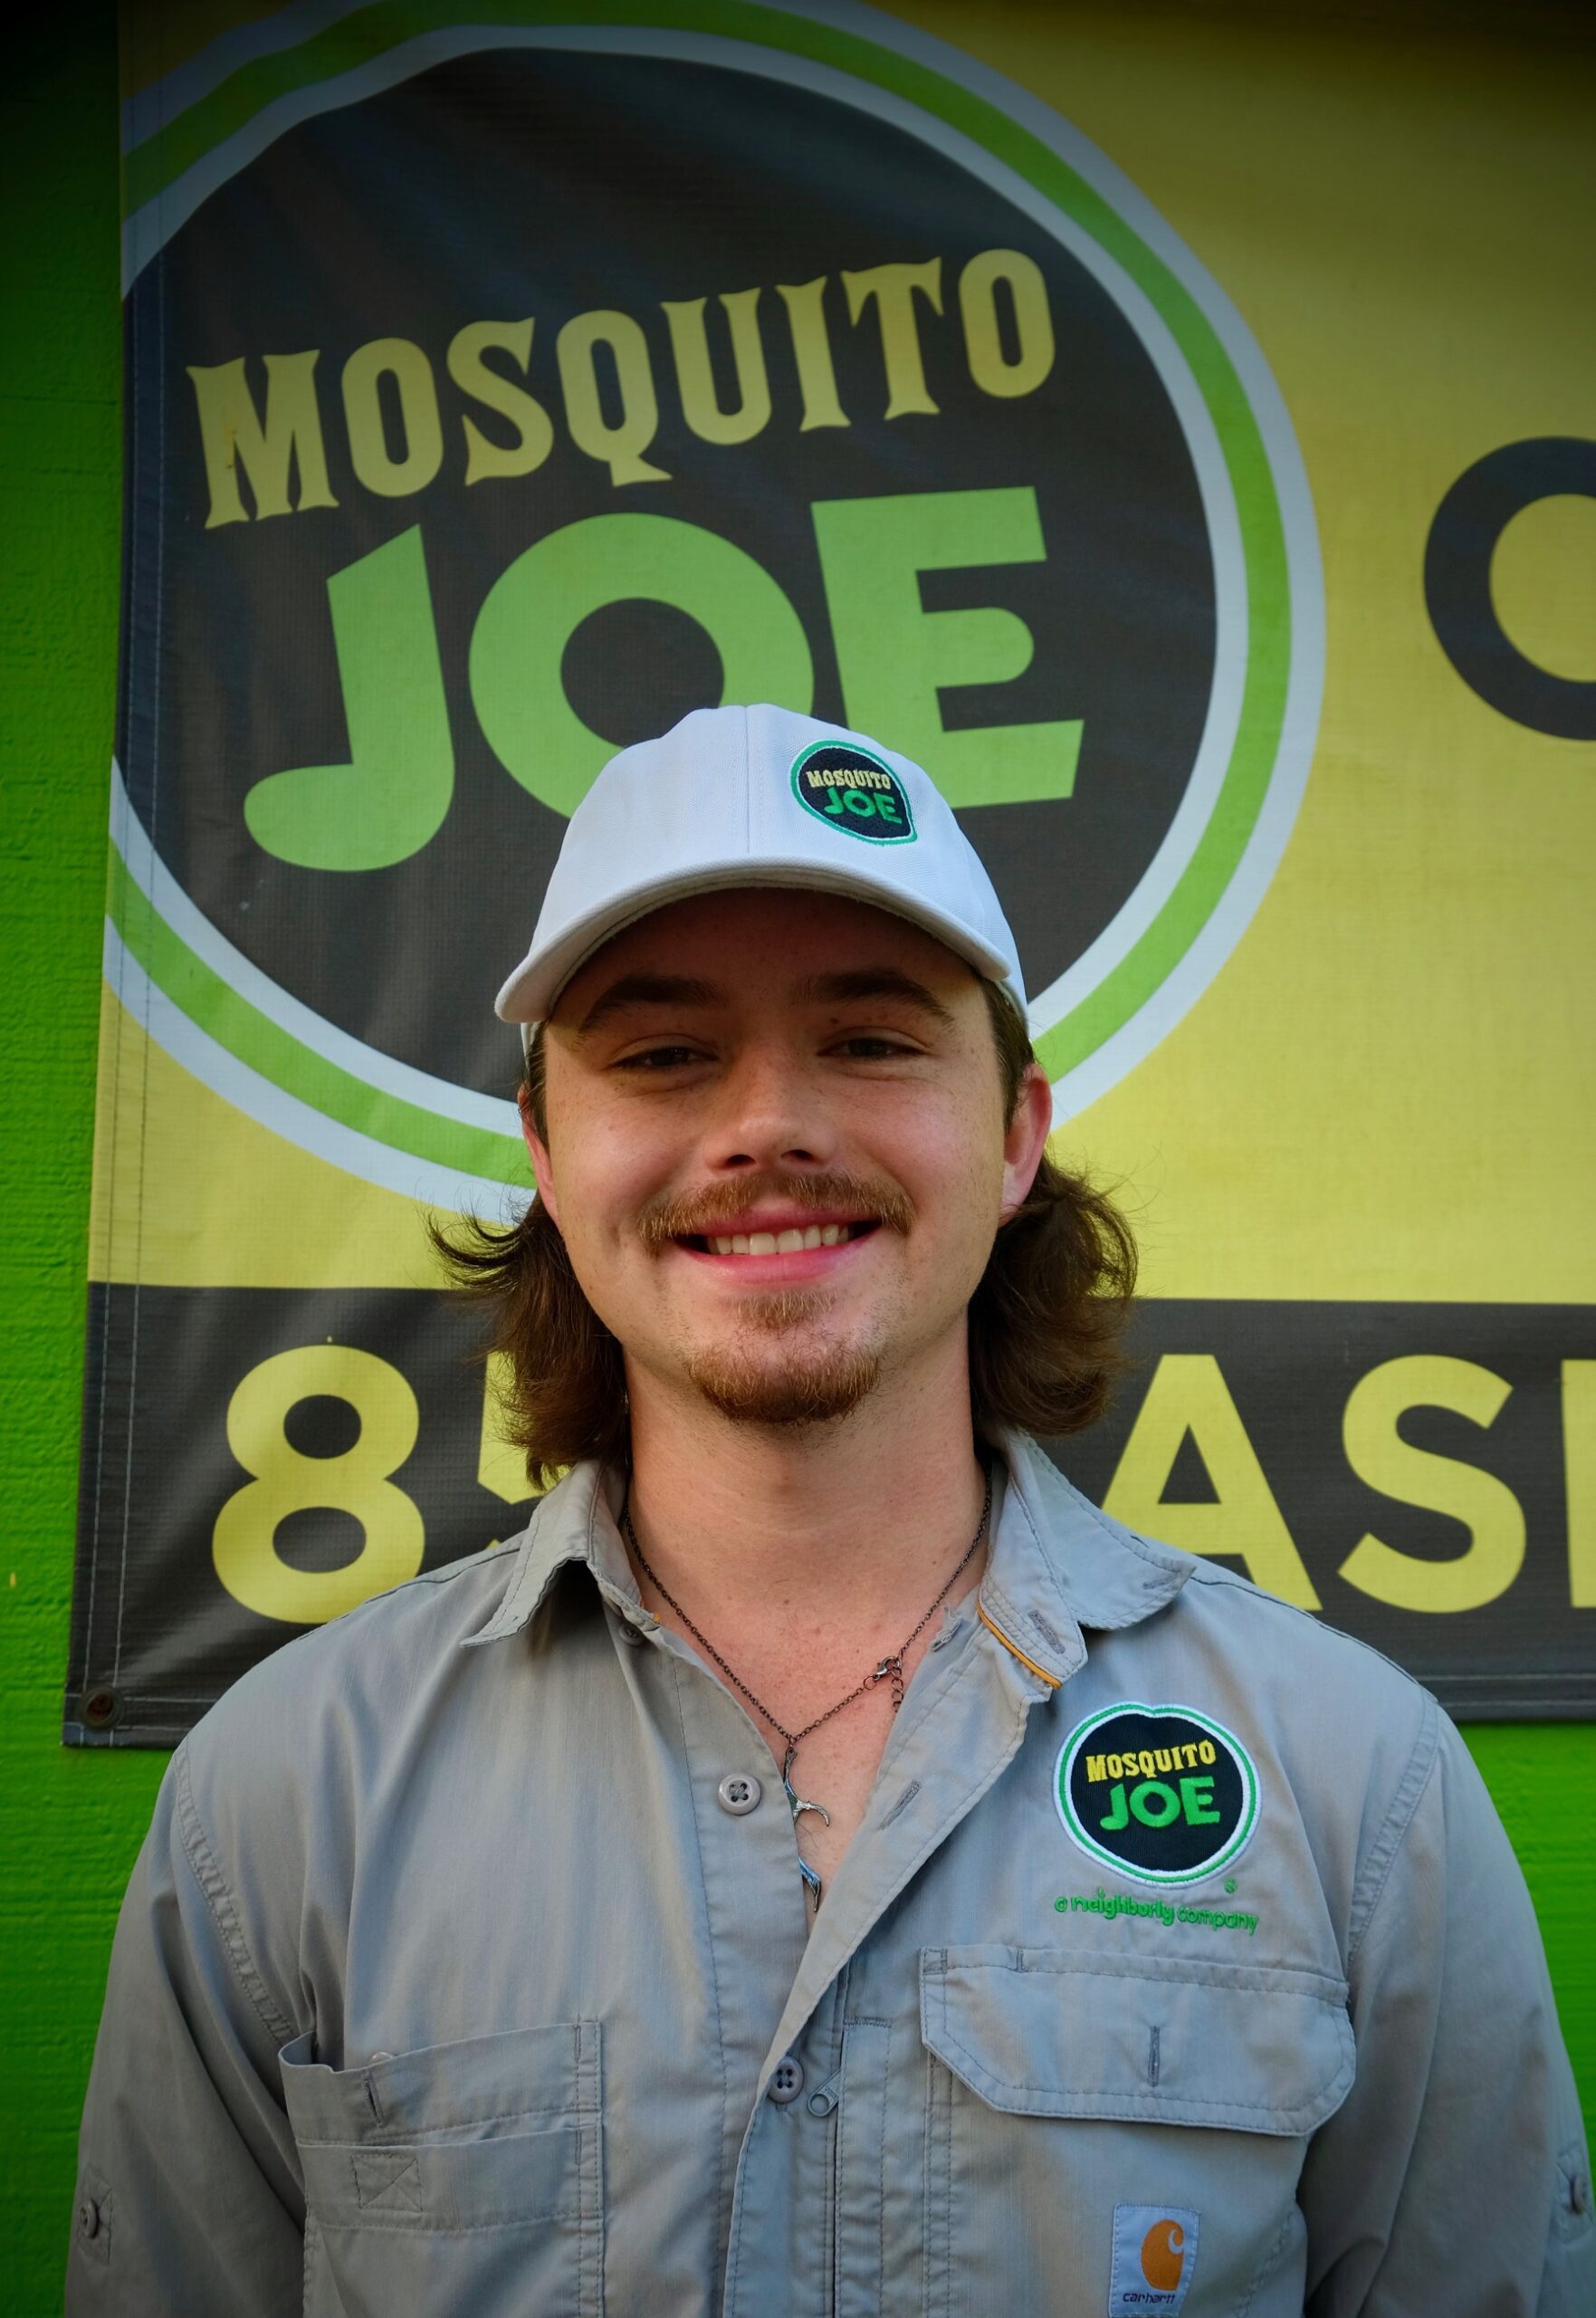 Mosquito Joe of S Brazos Valley Professional posing for photo